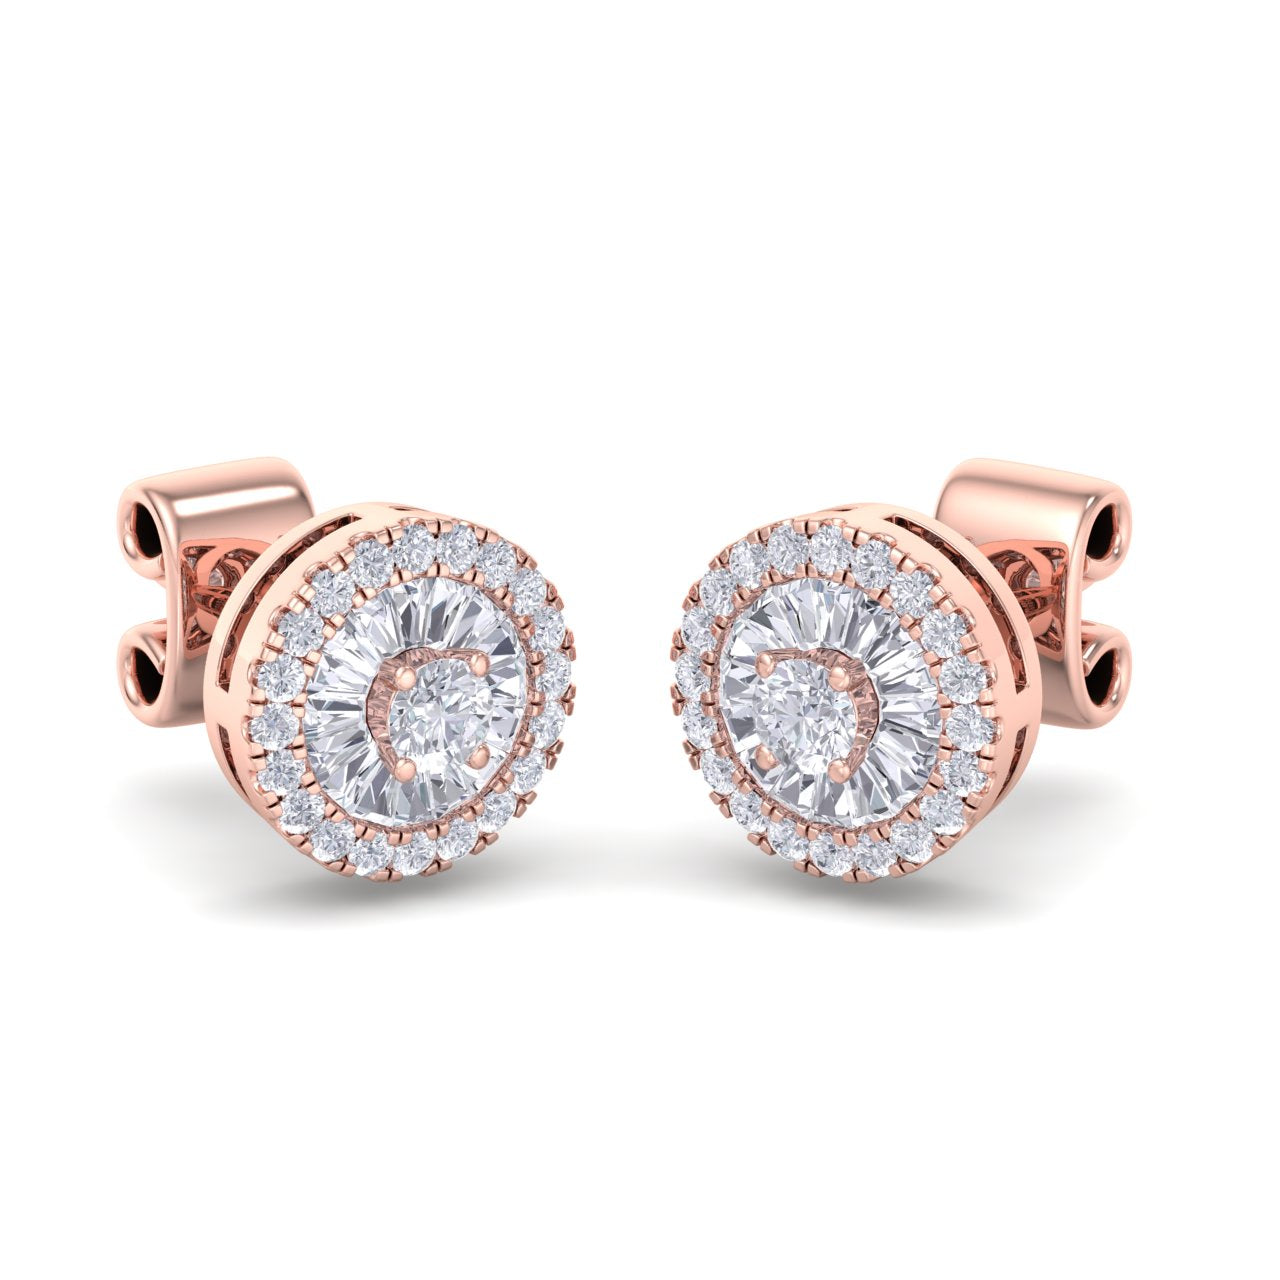 Halo stud earrings in rose gold with white diamonds of 0.46 ct in weight